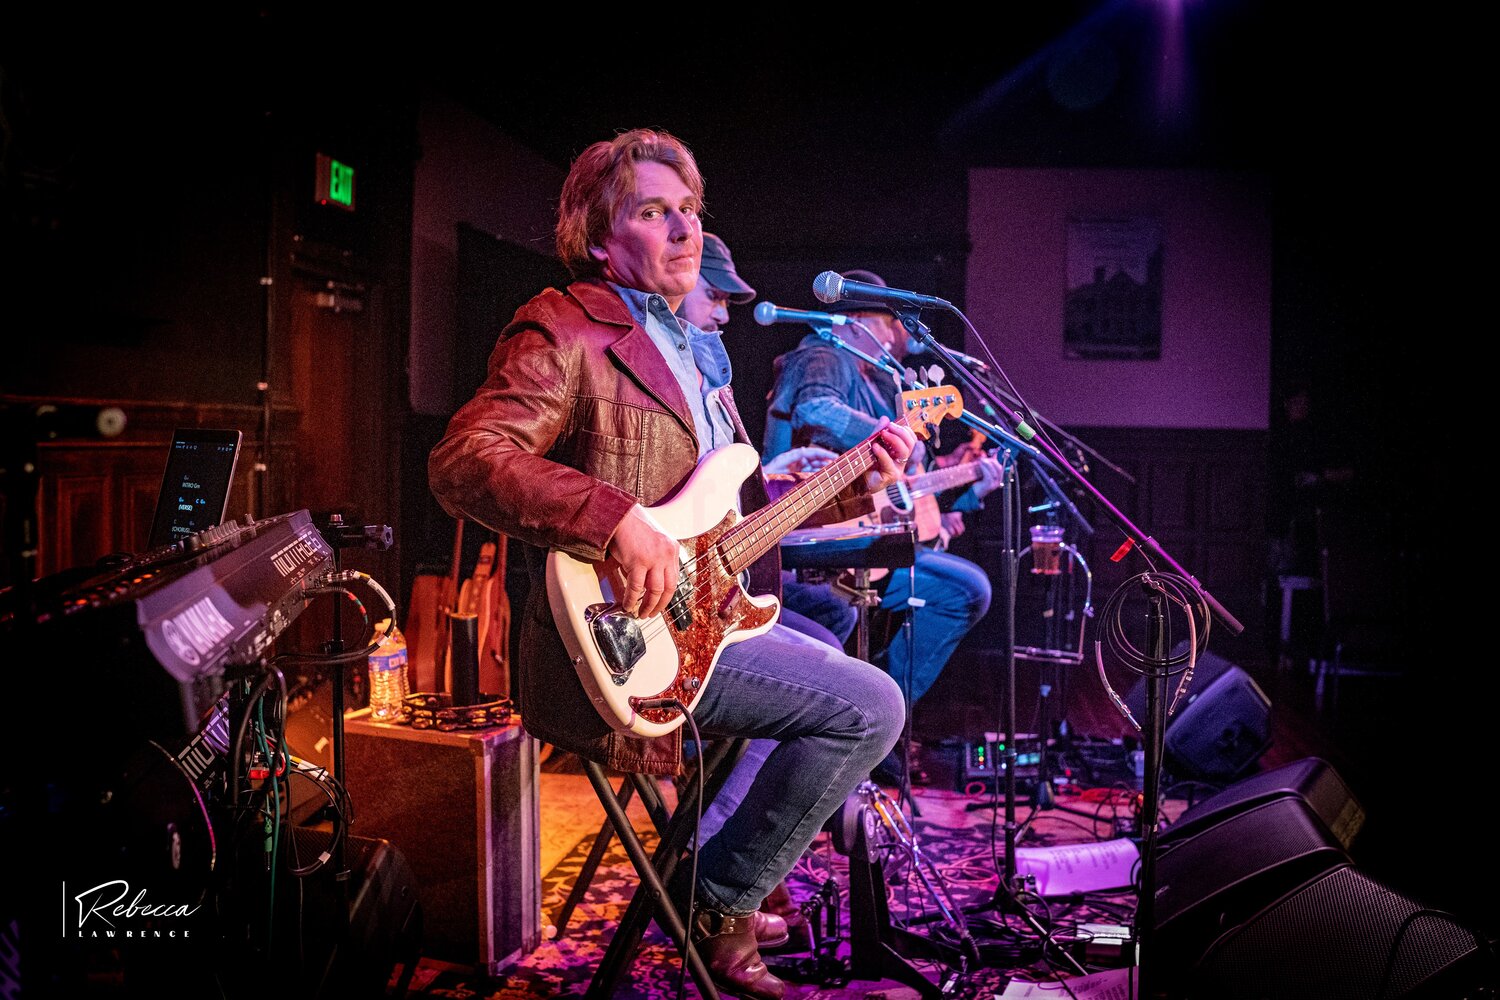 Eric Leffingwell performs with the band, Trinity, which celebrates the music and experience of Crosby Stills Nash and Young.